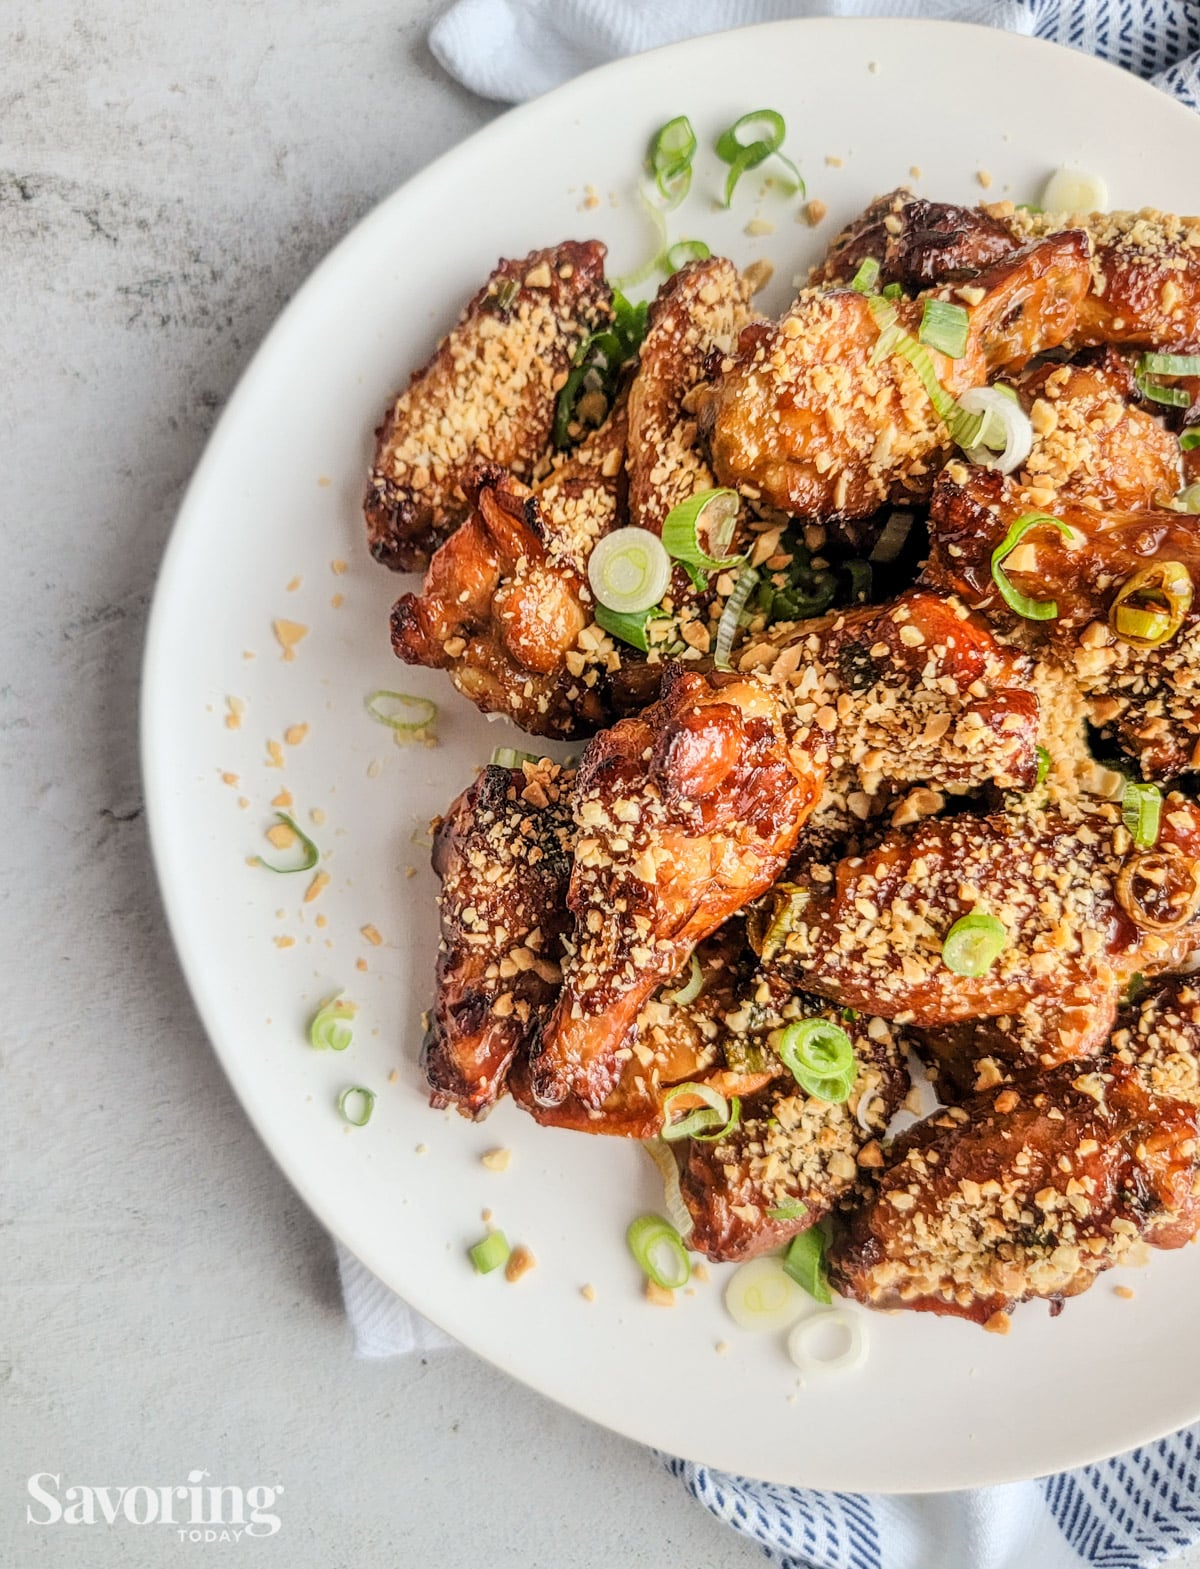 Kung Pao chicken wings dusted with peanuts and green onions